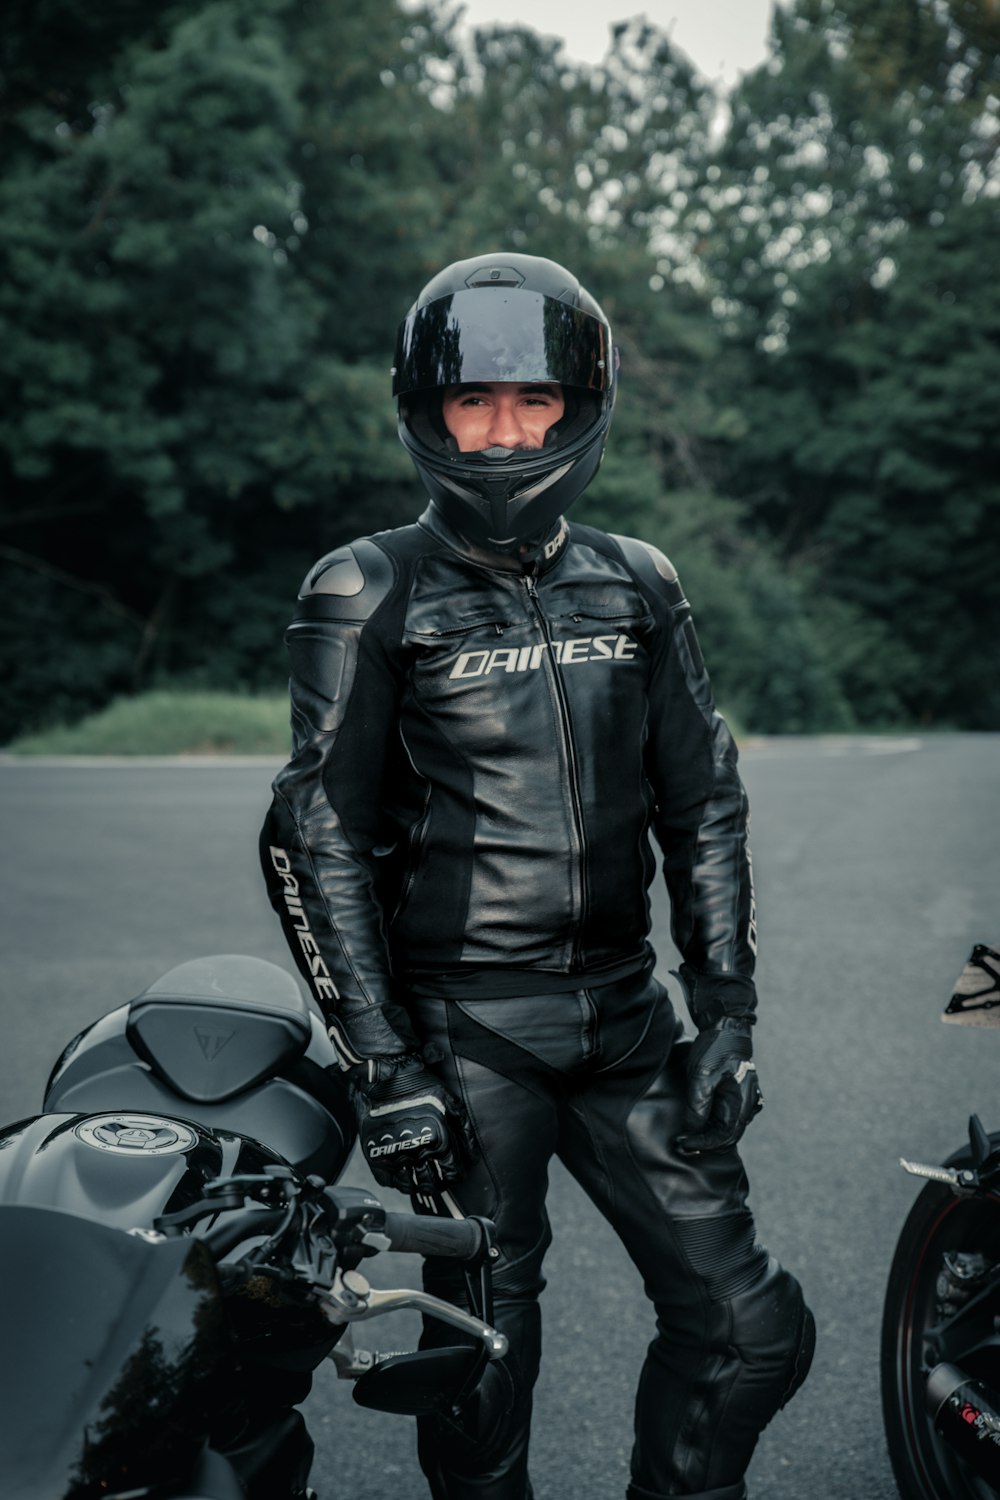 man in black leather jacket and helmet riding motorcycle